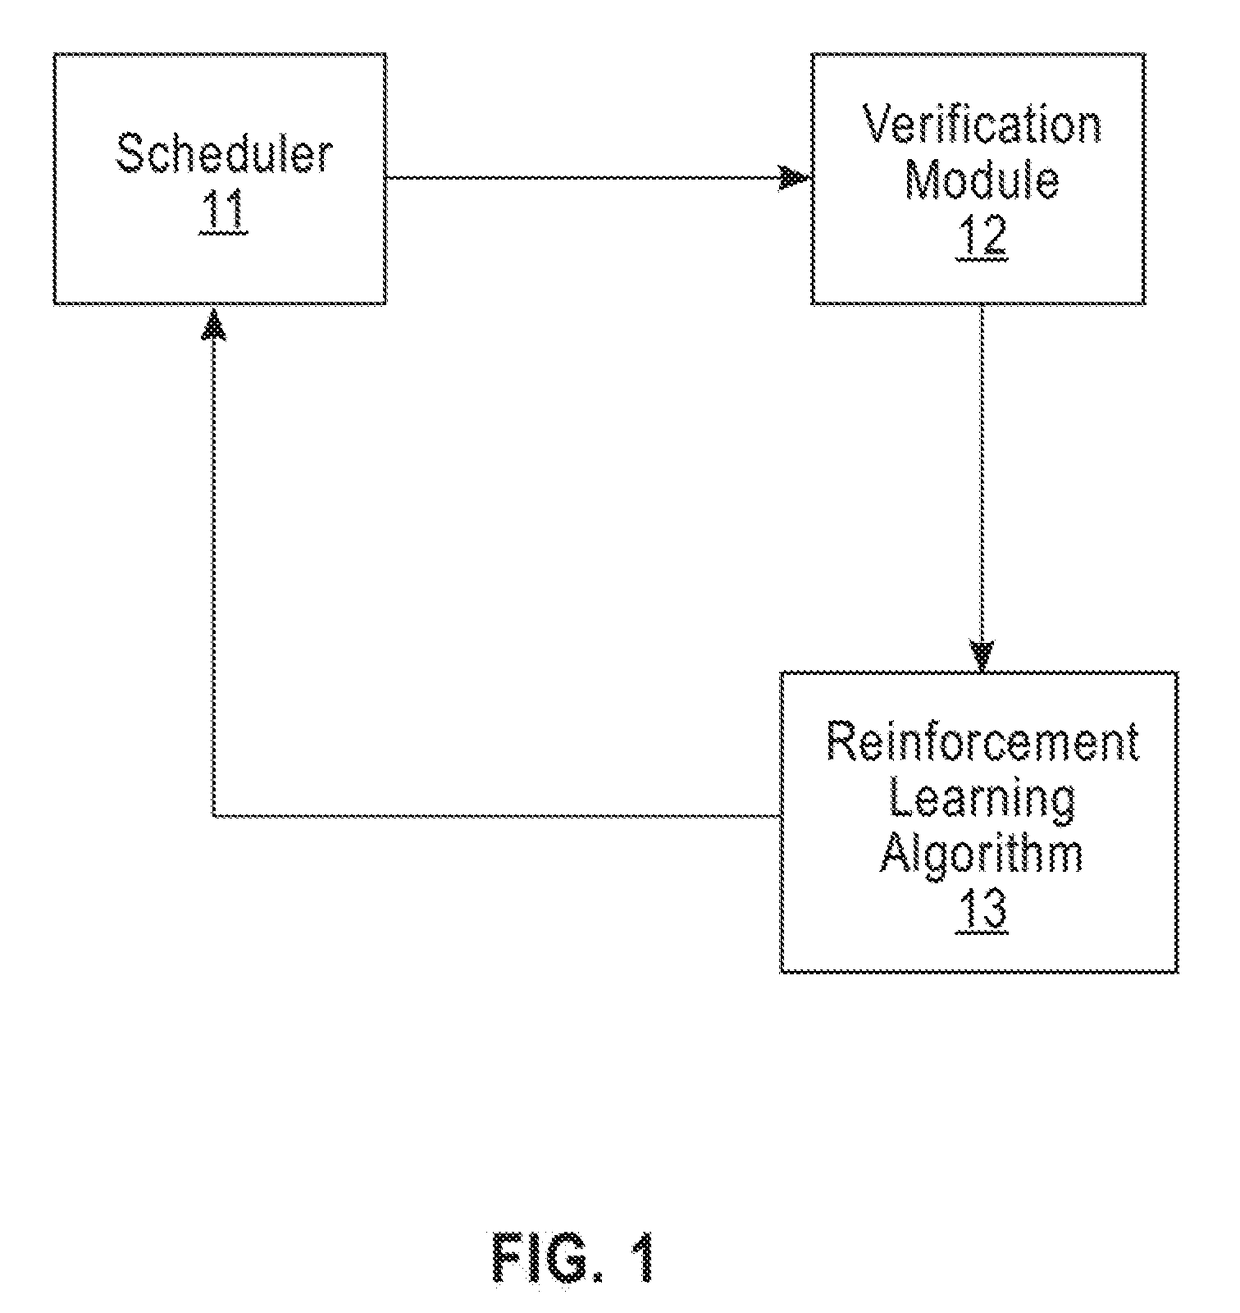 Automated generation of scheduling algorithms based on task relevance assessment